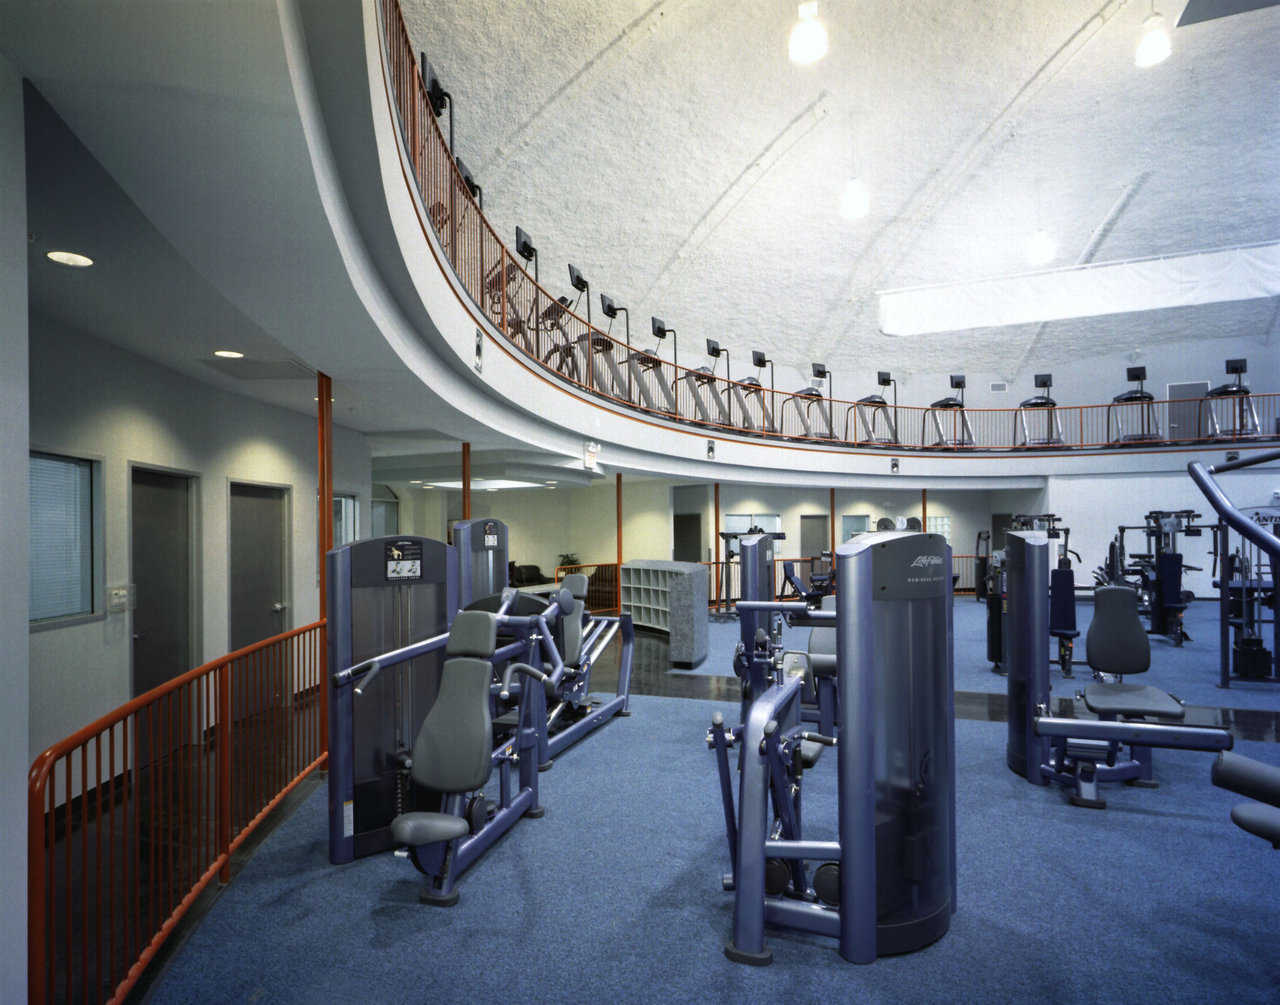 The upper level features a large number of cardio machines overlooking the lower level which provides strength training equipment, locker rooms, sauna and childcare.